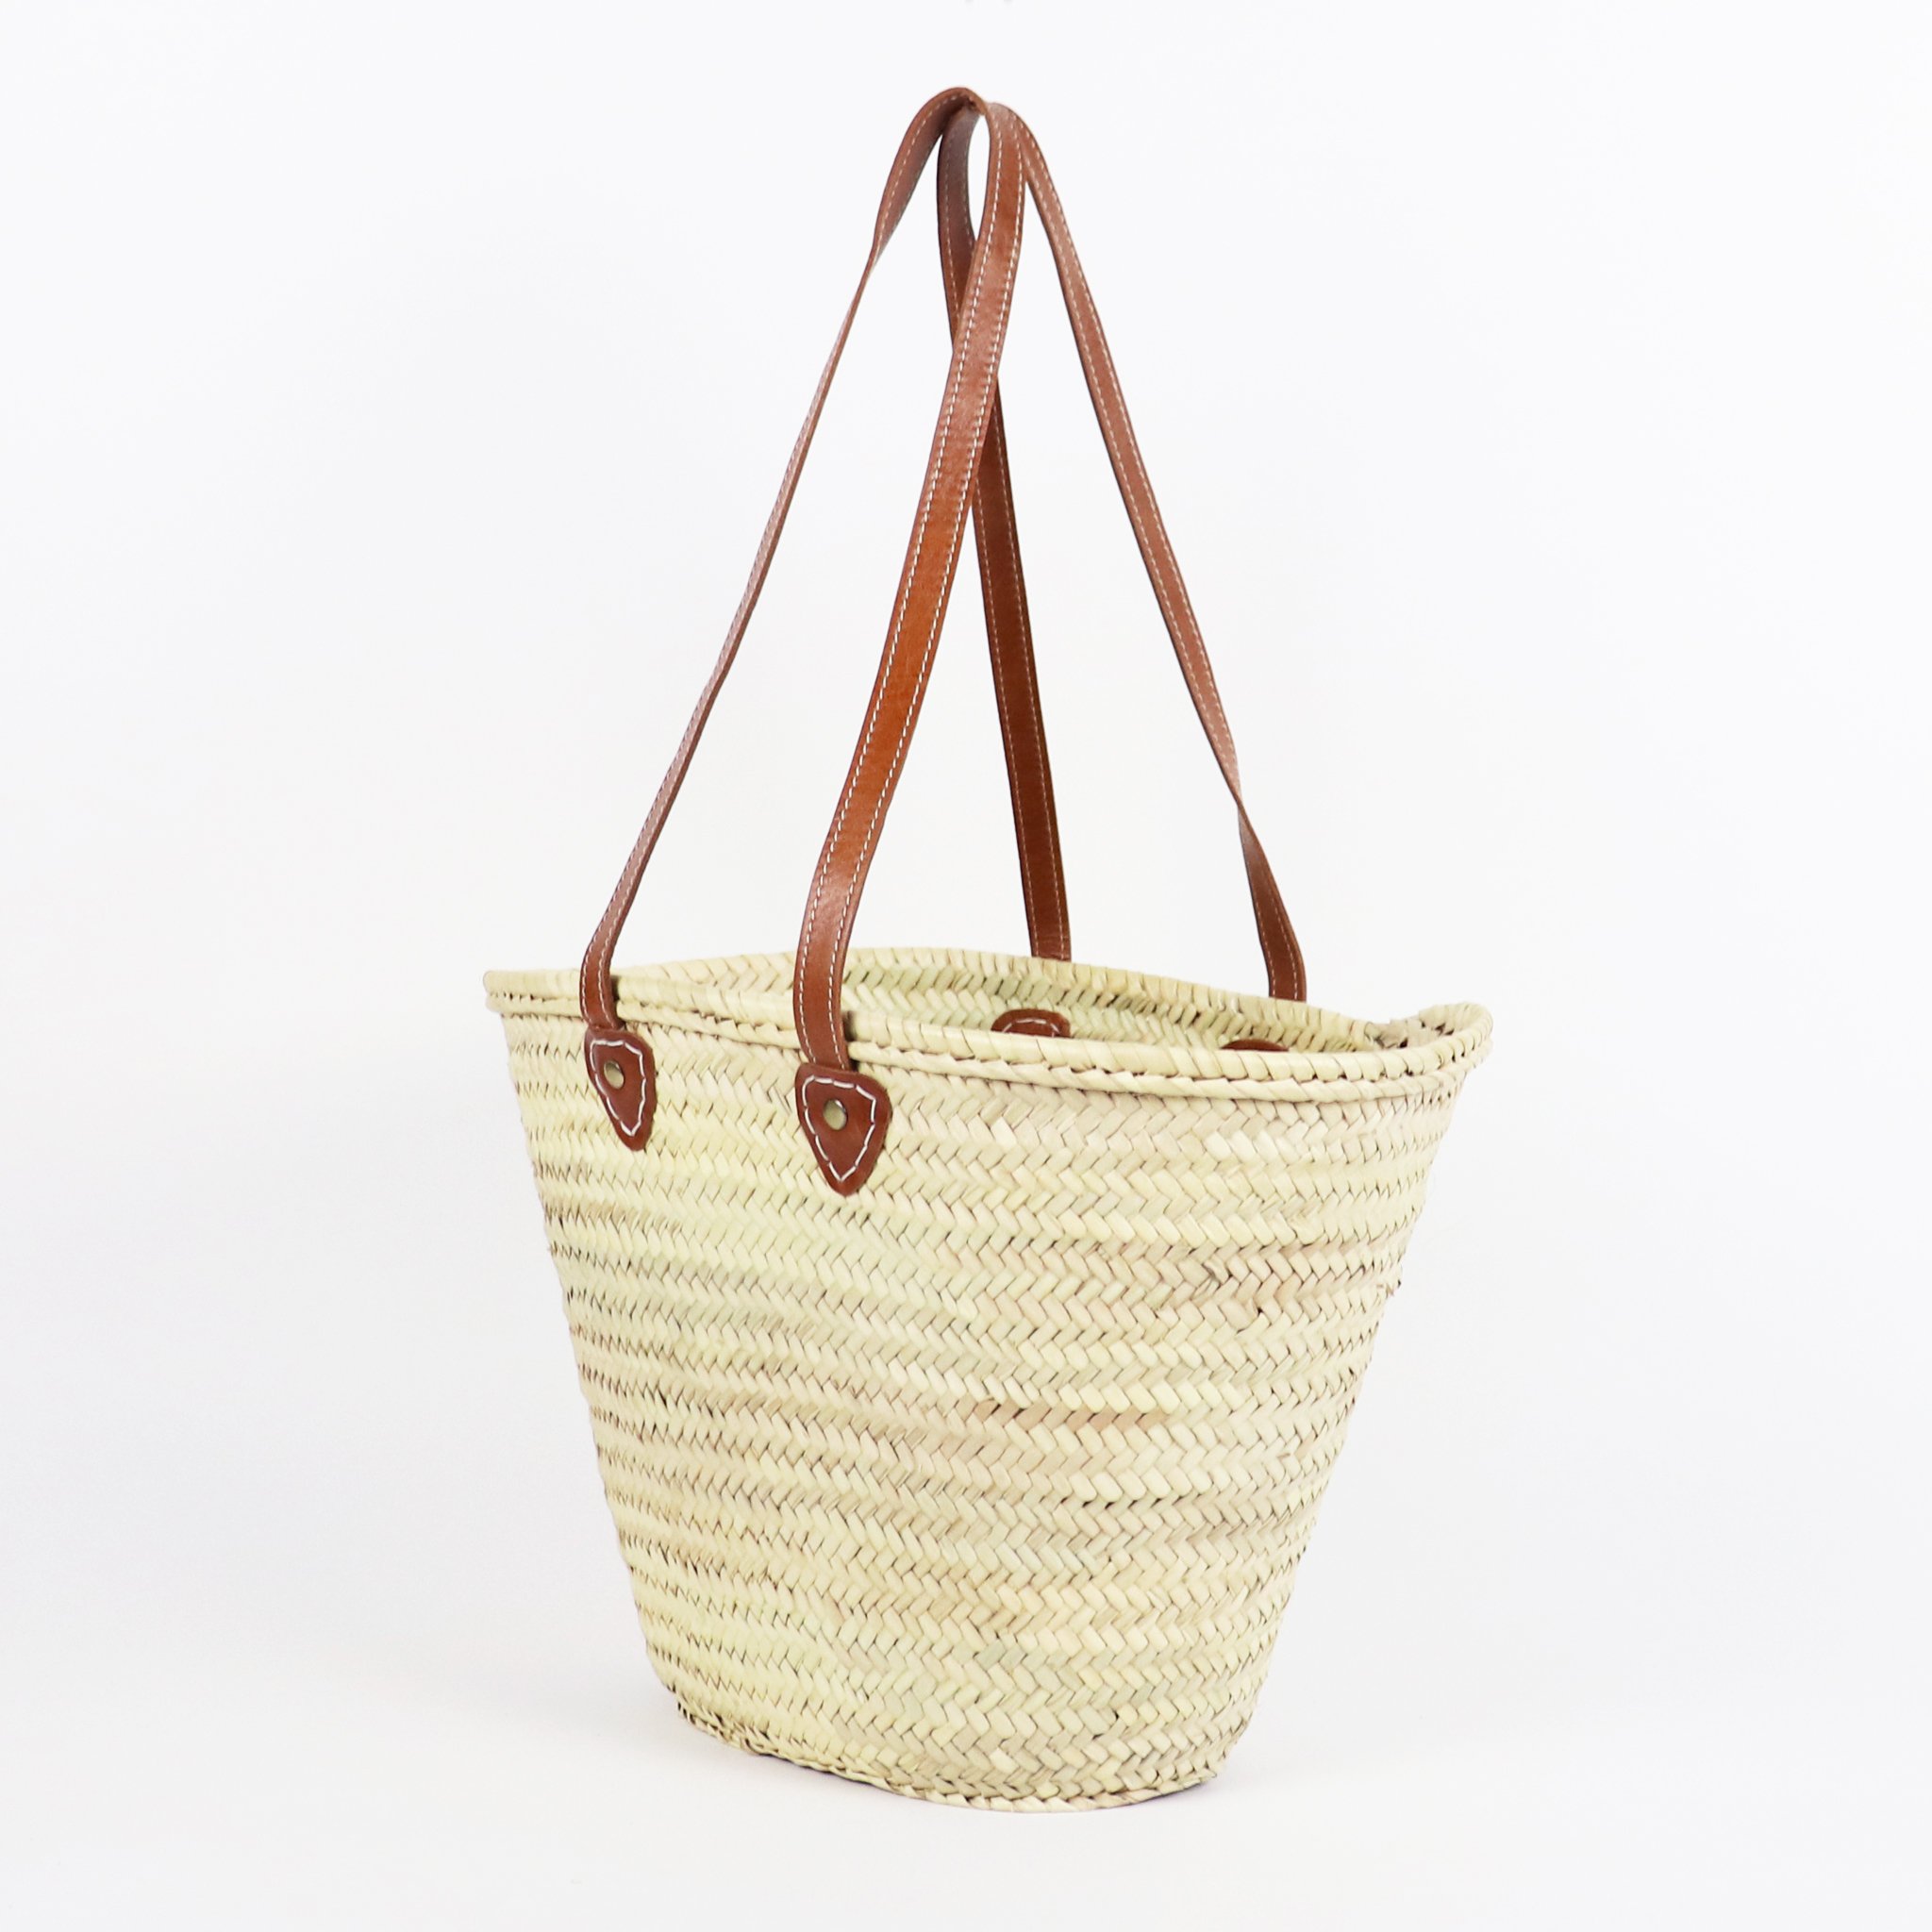  FRENCH BASKET straw bag with leather handles beach bag, straw  bag, market basket, Moroccan Basket, Crossbody Bag, Summer Bag : Handmade  Products